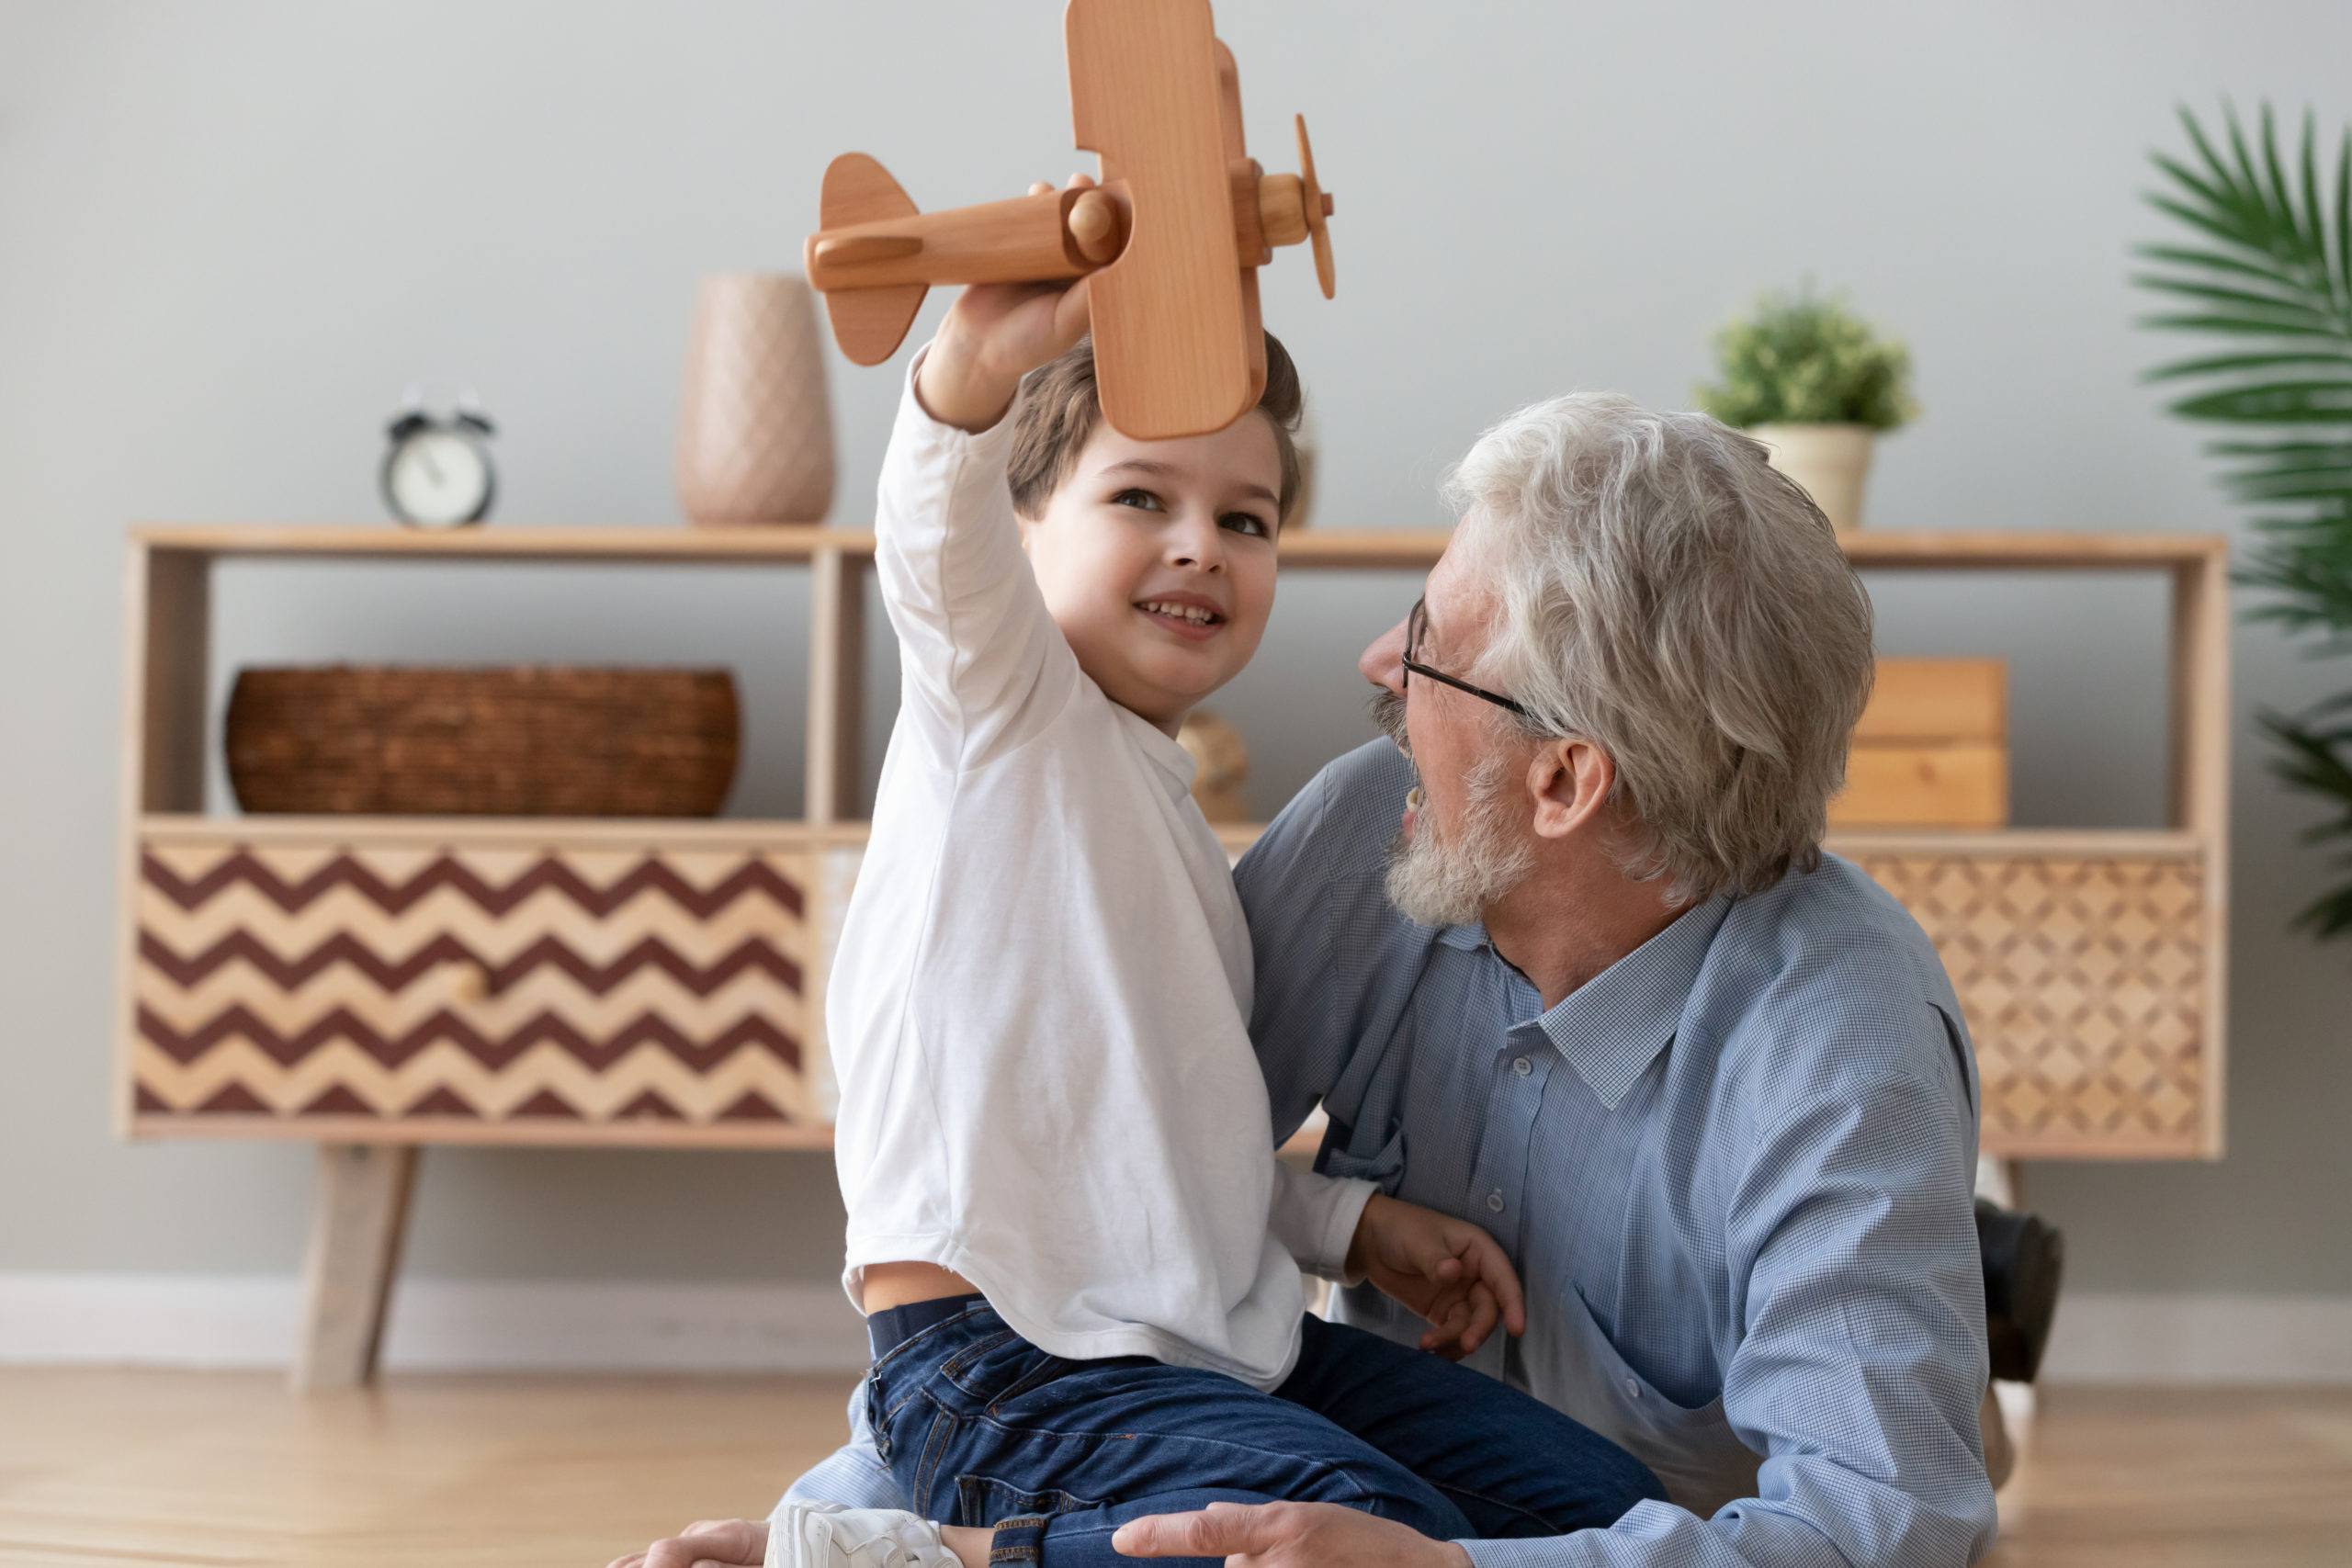 5 Fun Activities for Grandparents and Grandkids to Connect